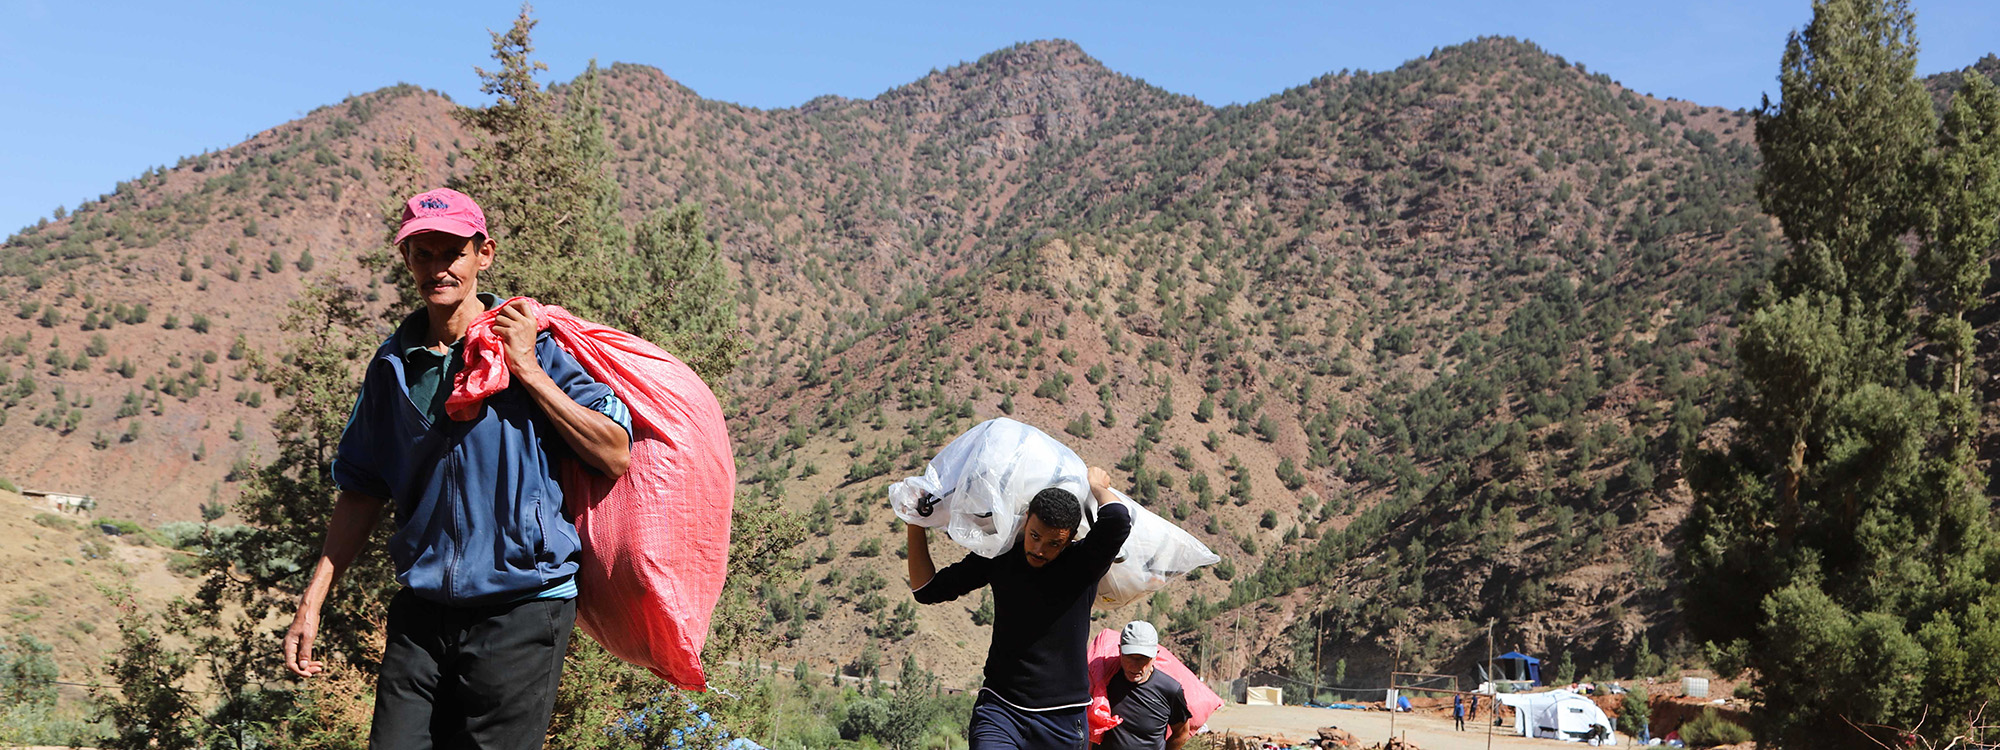 People carrying bags of aid in the Atlas Mountains in Morocco